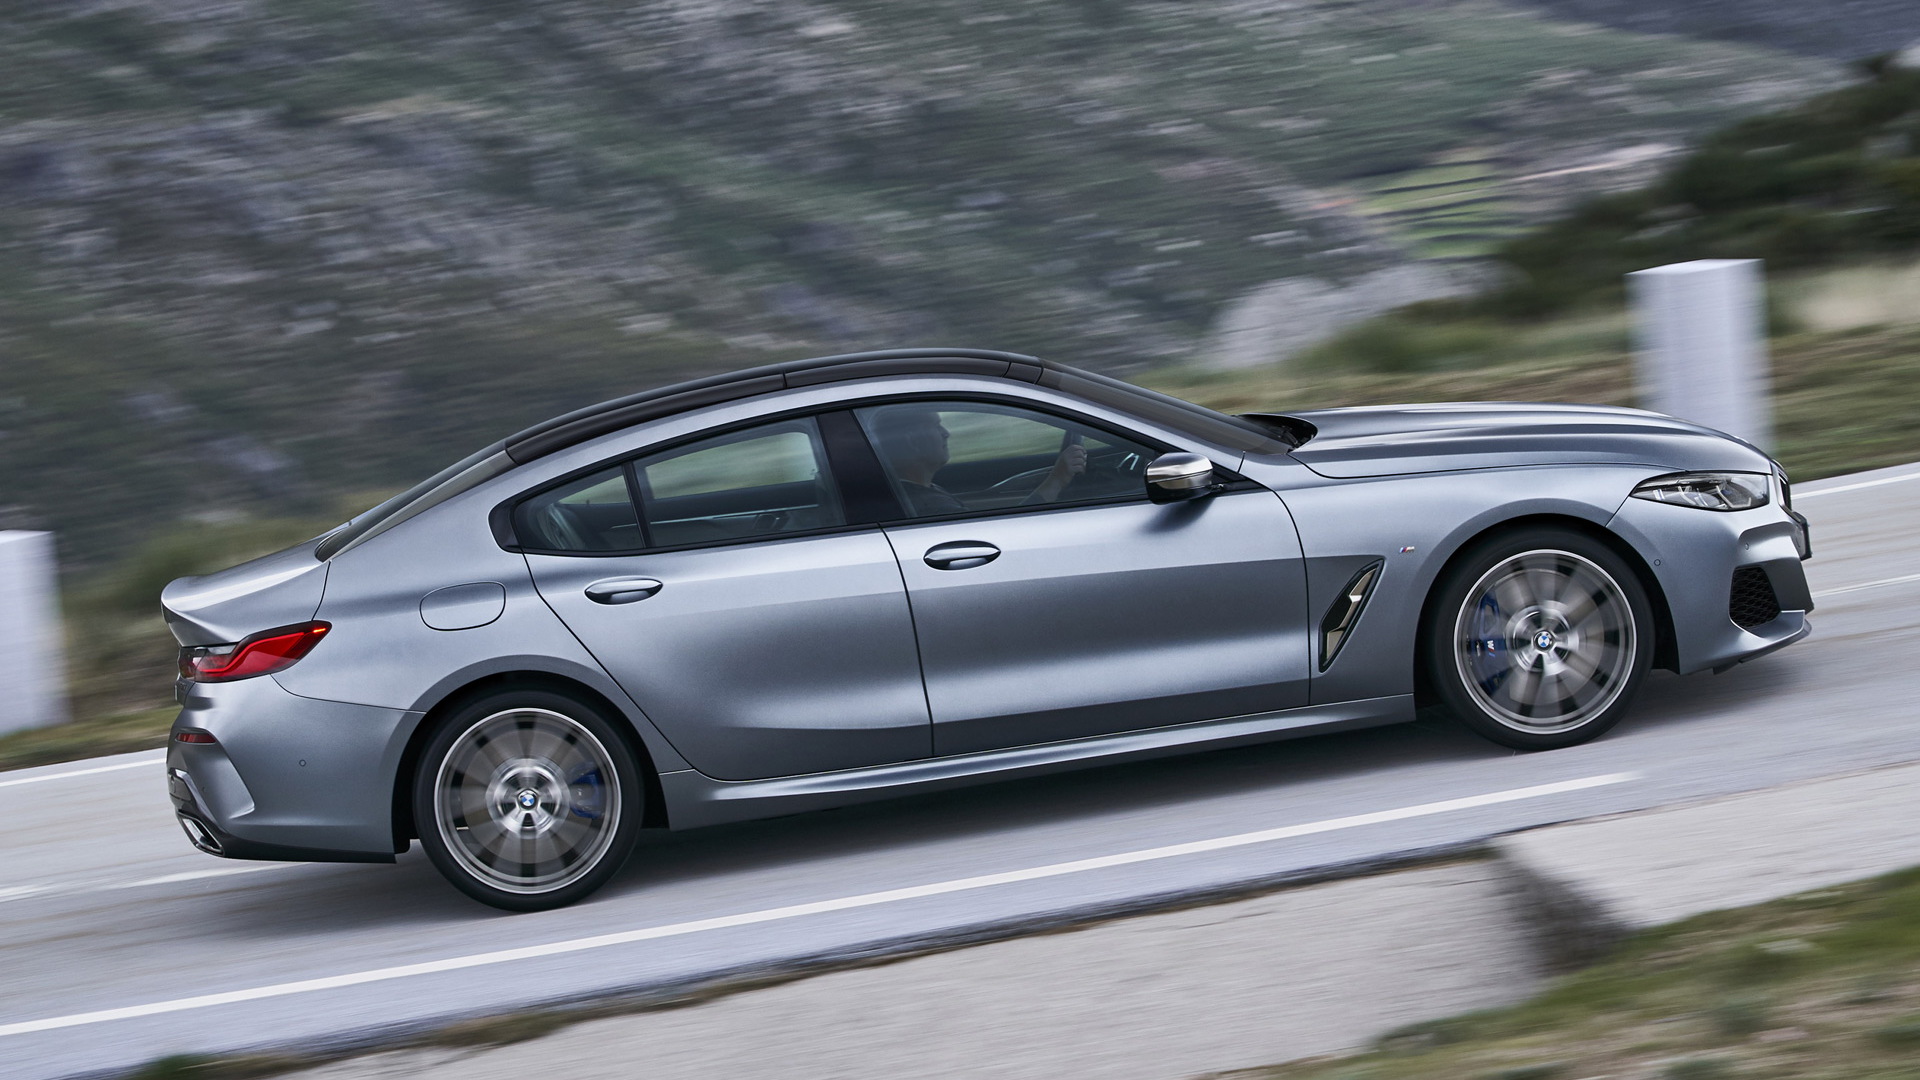 2020 BMW 8-Series Gran Coupe revealed, looks stunning